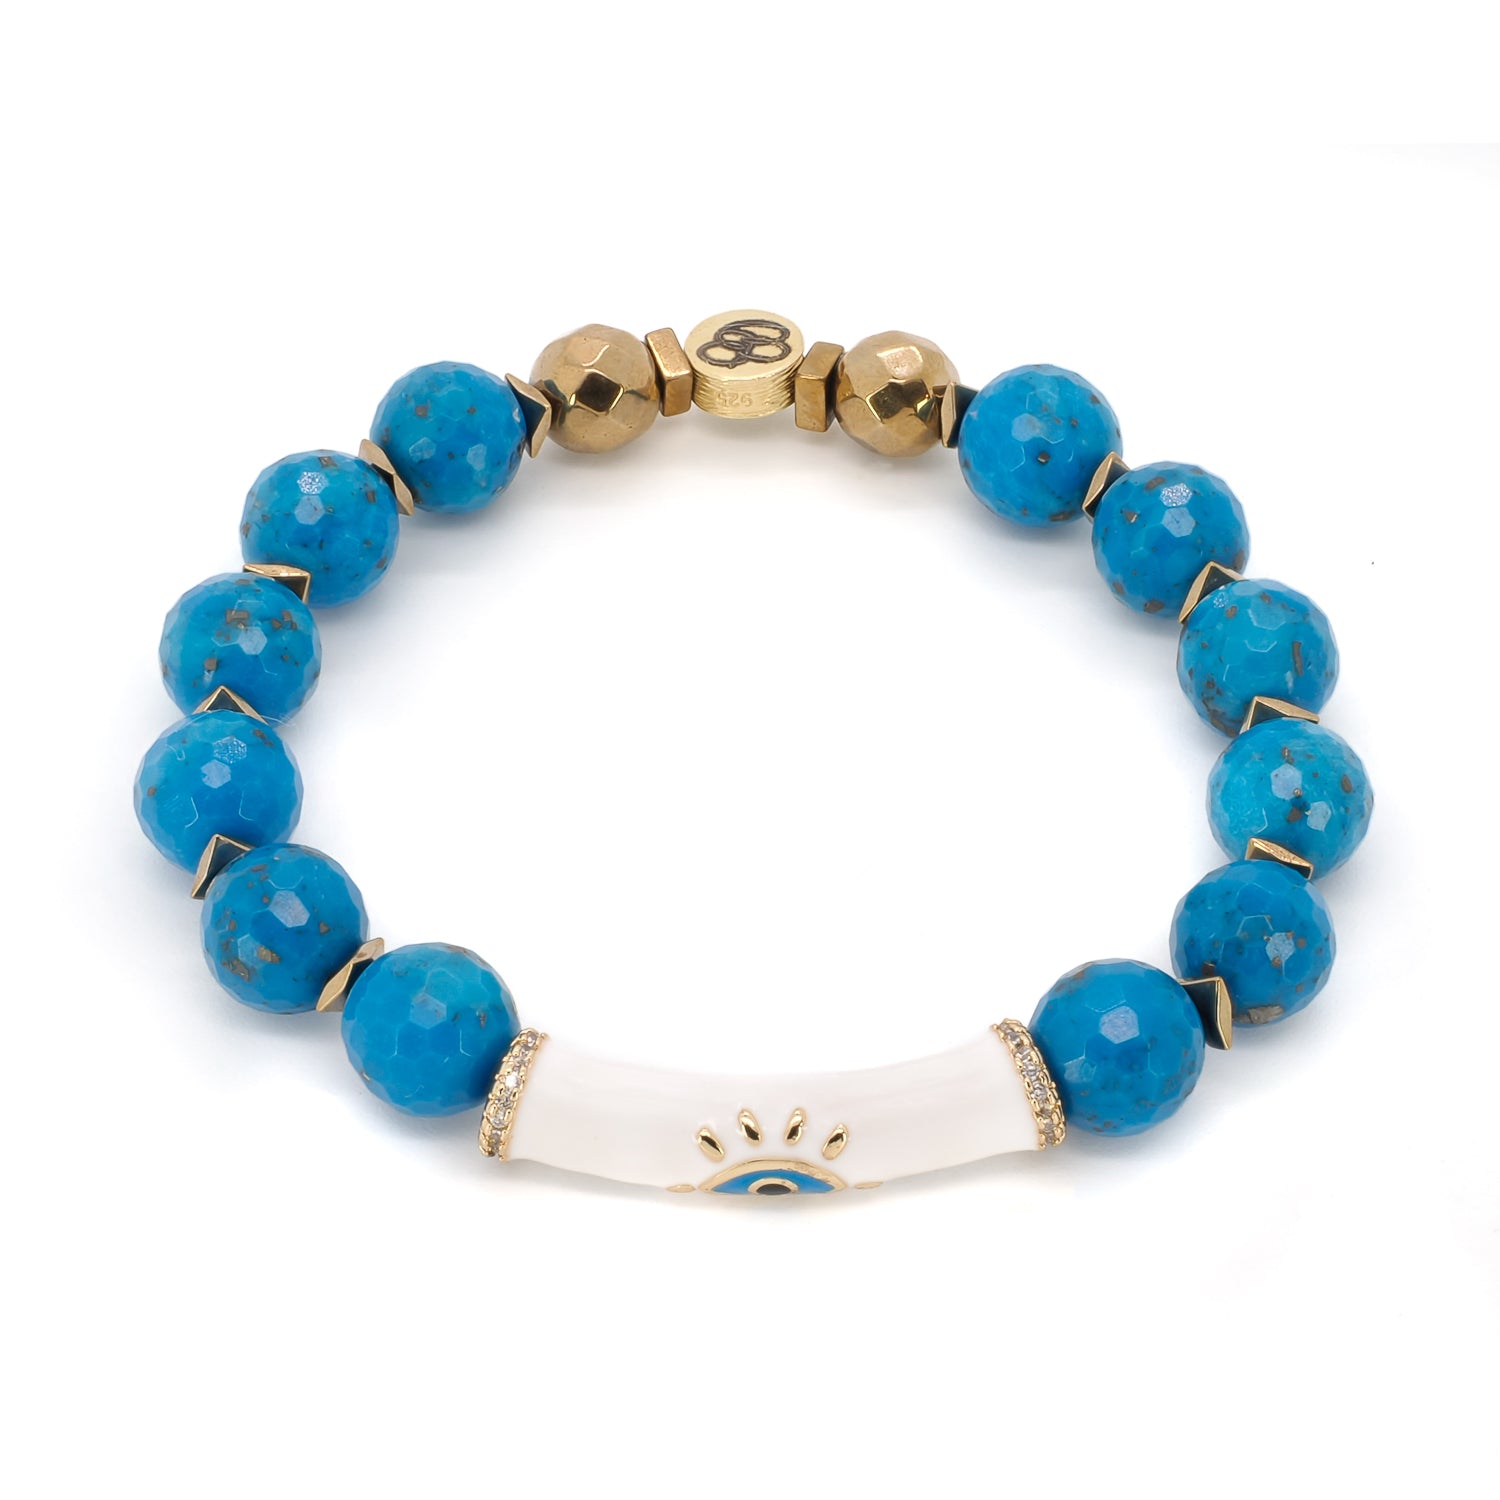 Discover the beauty and tranquility of the Turquoise Inner Calm Bracelet, featuring stunning turquoise stone beads and gold-plated accents.